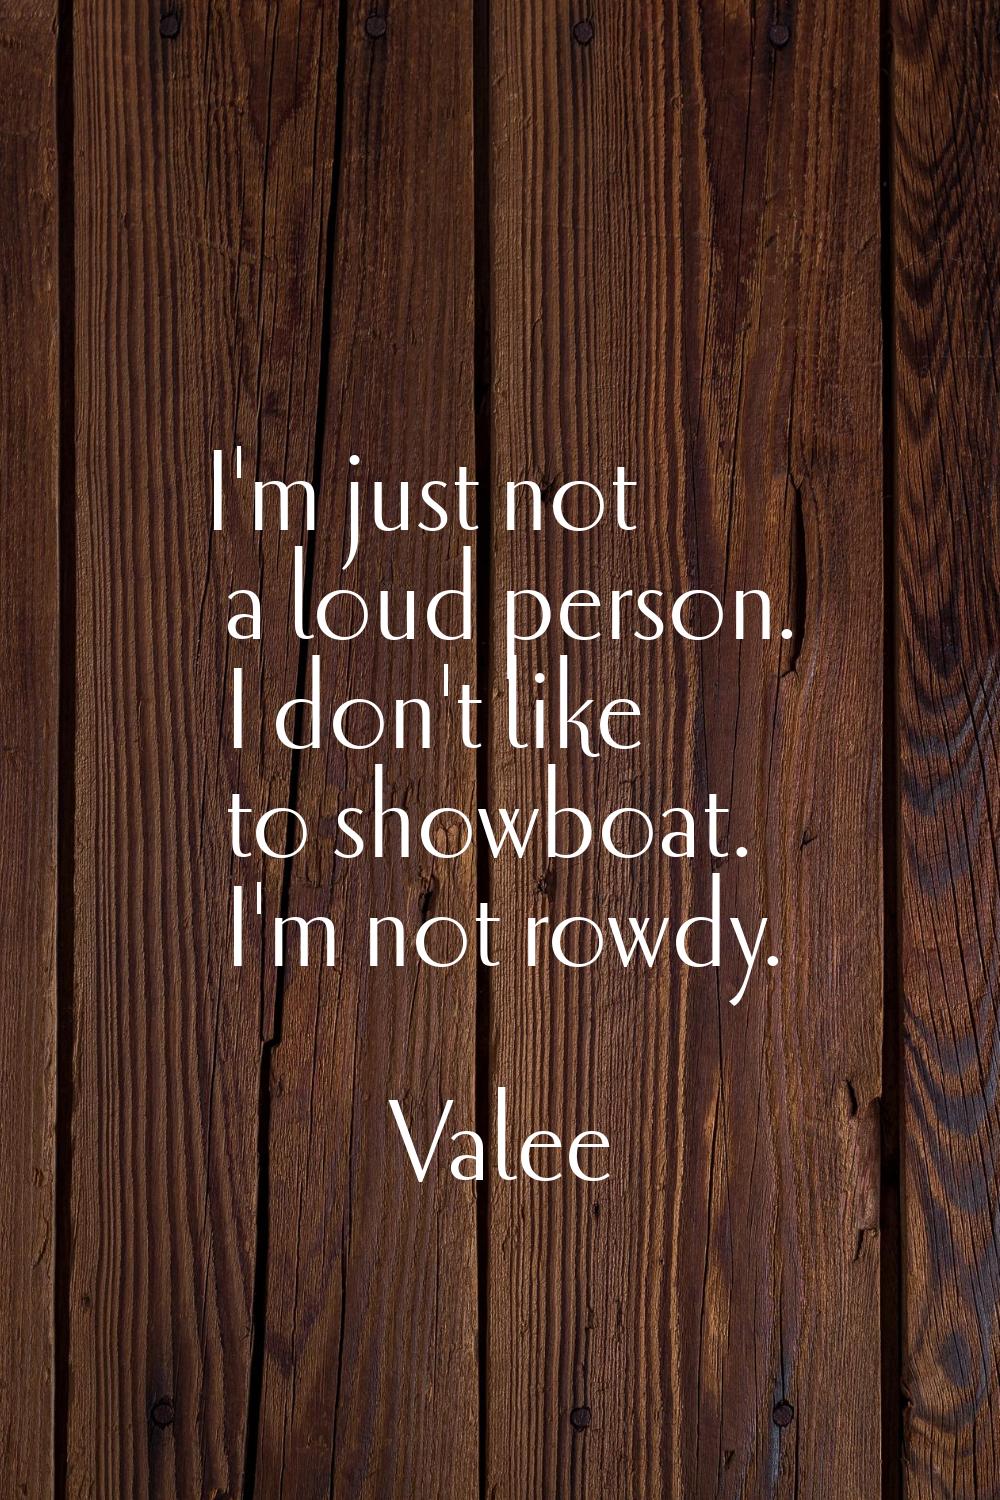 I'm just not a loud person. I don't like to showboat. I'm not rowdy.